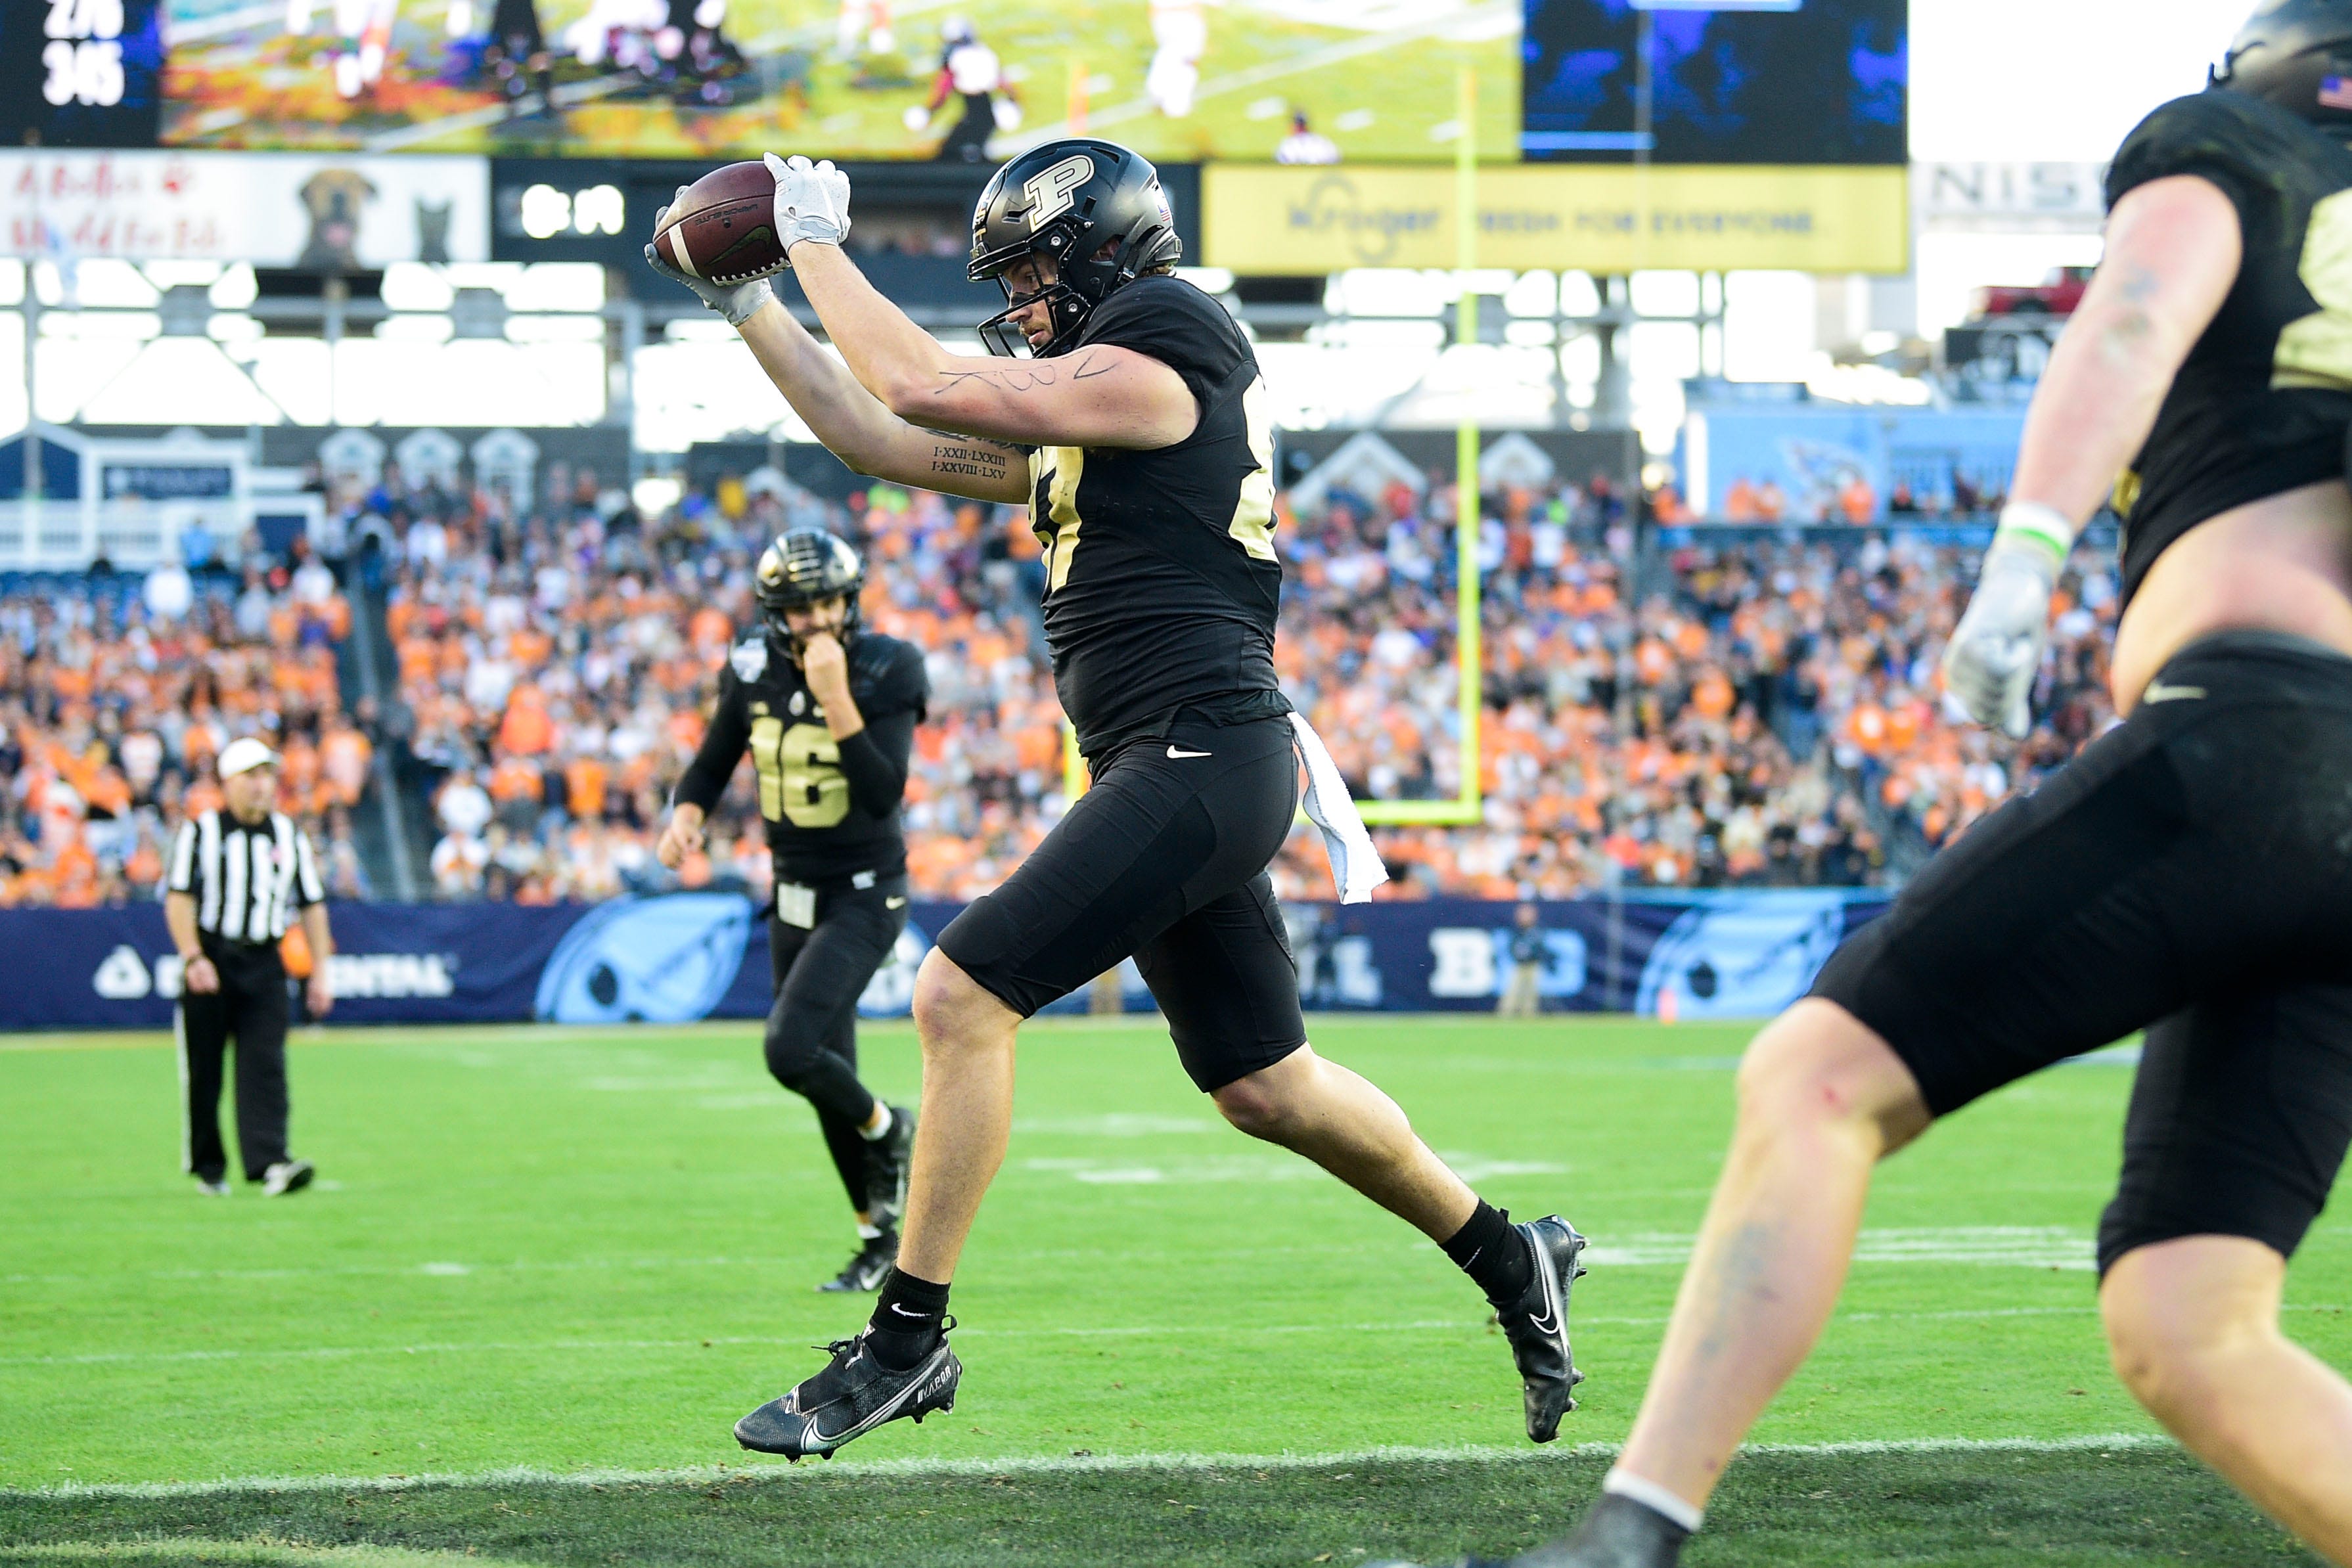 Tennessee tight end Jacob Warren scores a touchdown at the 2021 Music City Bowl NCAA college football game at Nissan Stadium in Nashville, Tenn. on Thursday, Dec. 30, 2021.&nbsp;